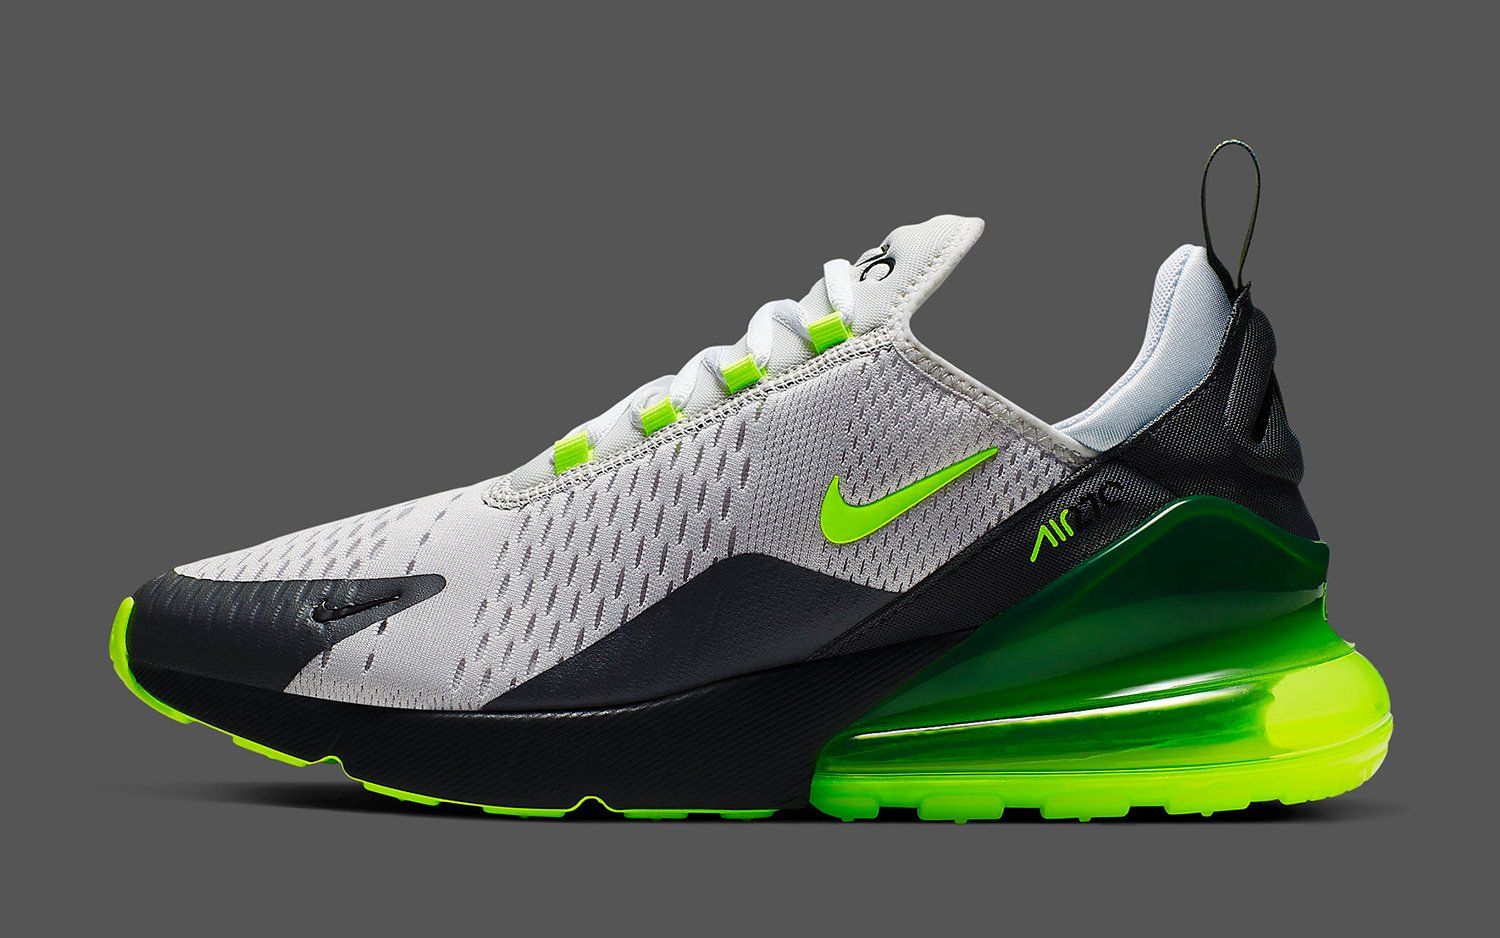 vocal bandeja Regresa The Air Max 270 Assumes the Iconic AM95's OG "Neon" Colorway | HOUSE OF HEAT